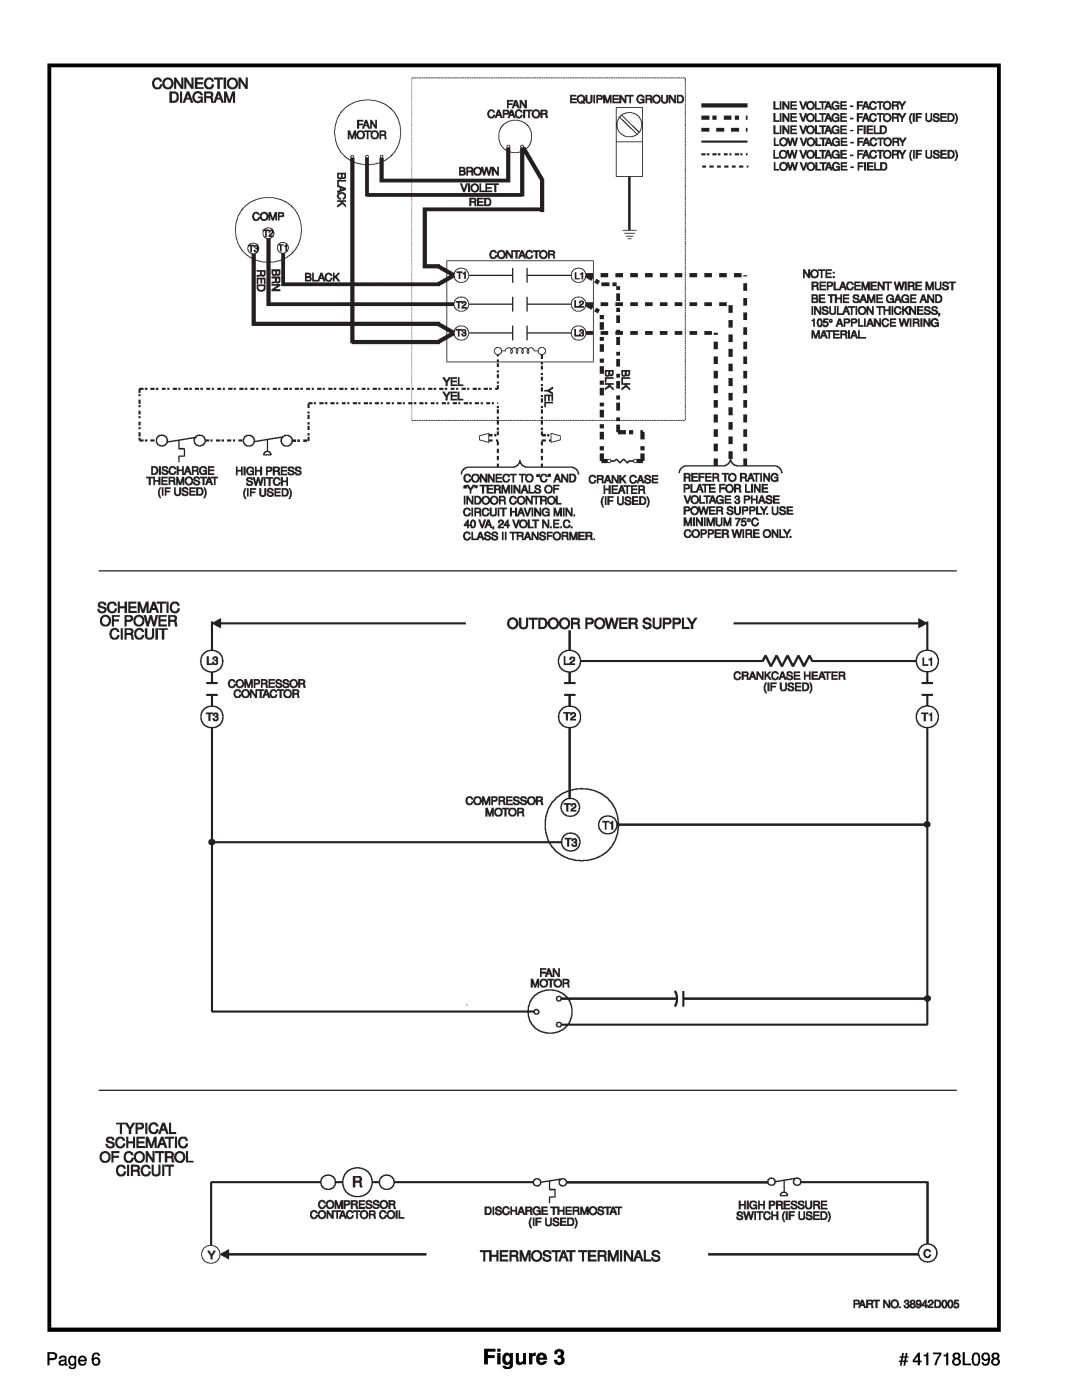 Lenoxx Electronics 41718L098 Connection, Diagram, Schematic Of Poweroutdoor Power Supply Circuit, Thermostat Terminals 